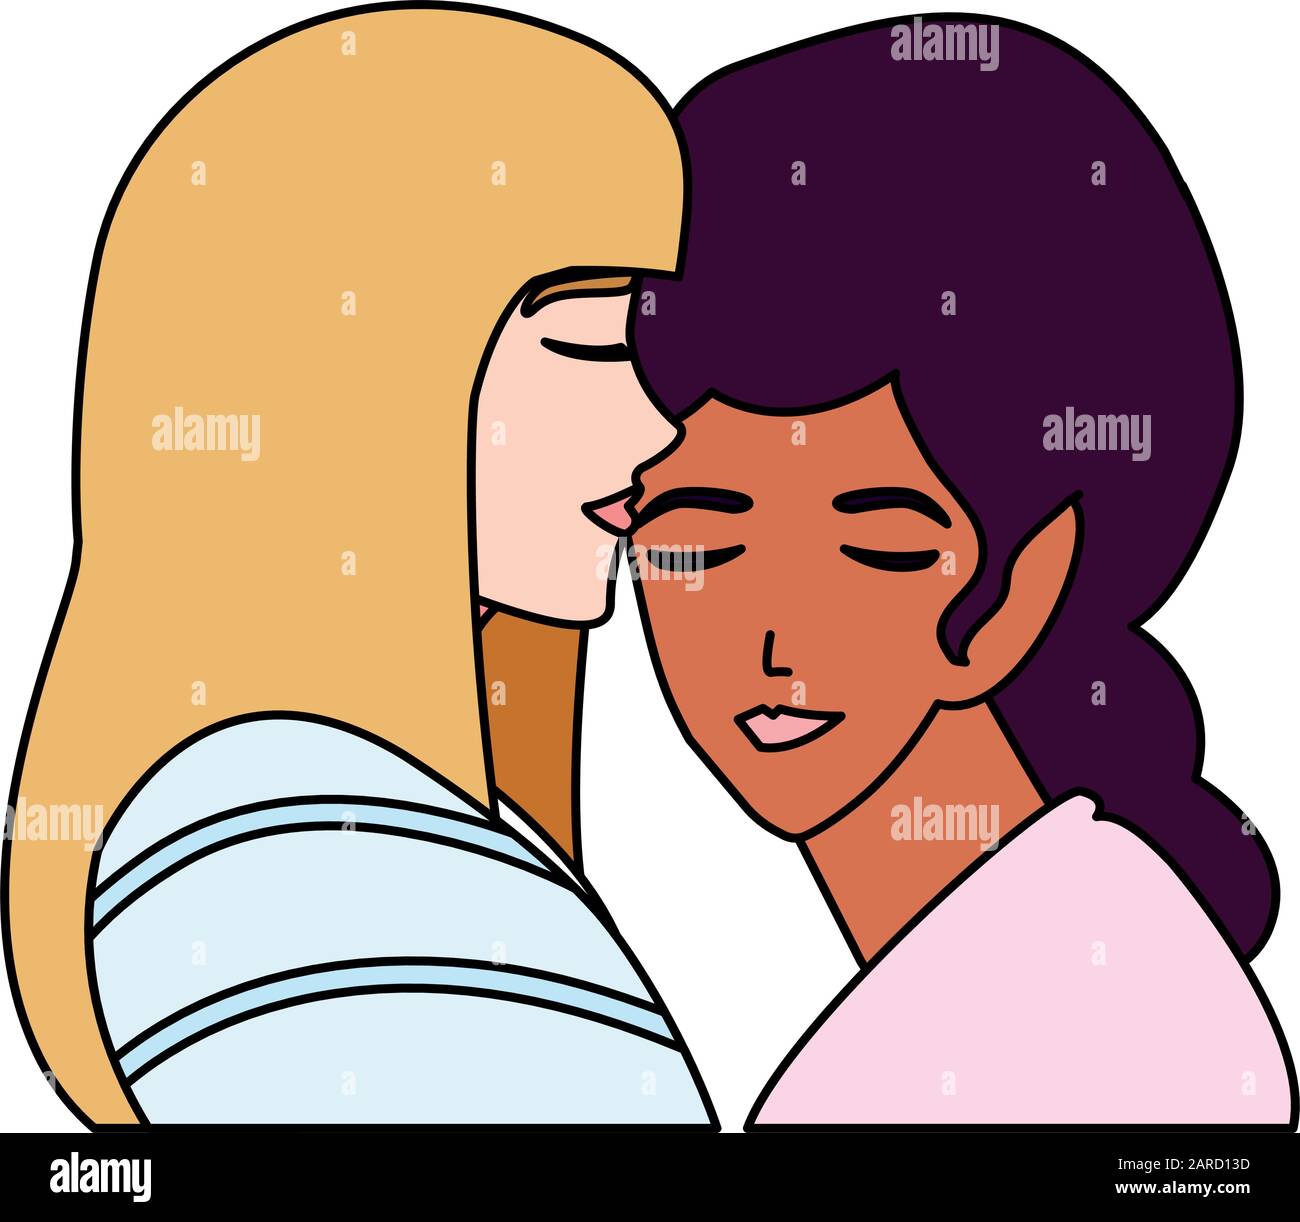 Women In Love Women Embracing Each Other Affectionately Vector Illustration Design Stock Vector 